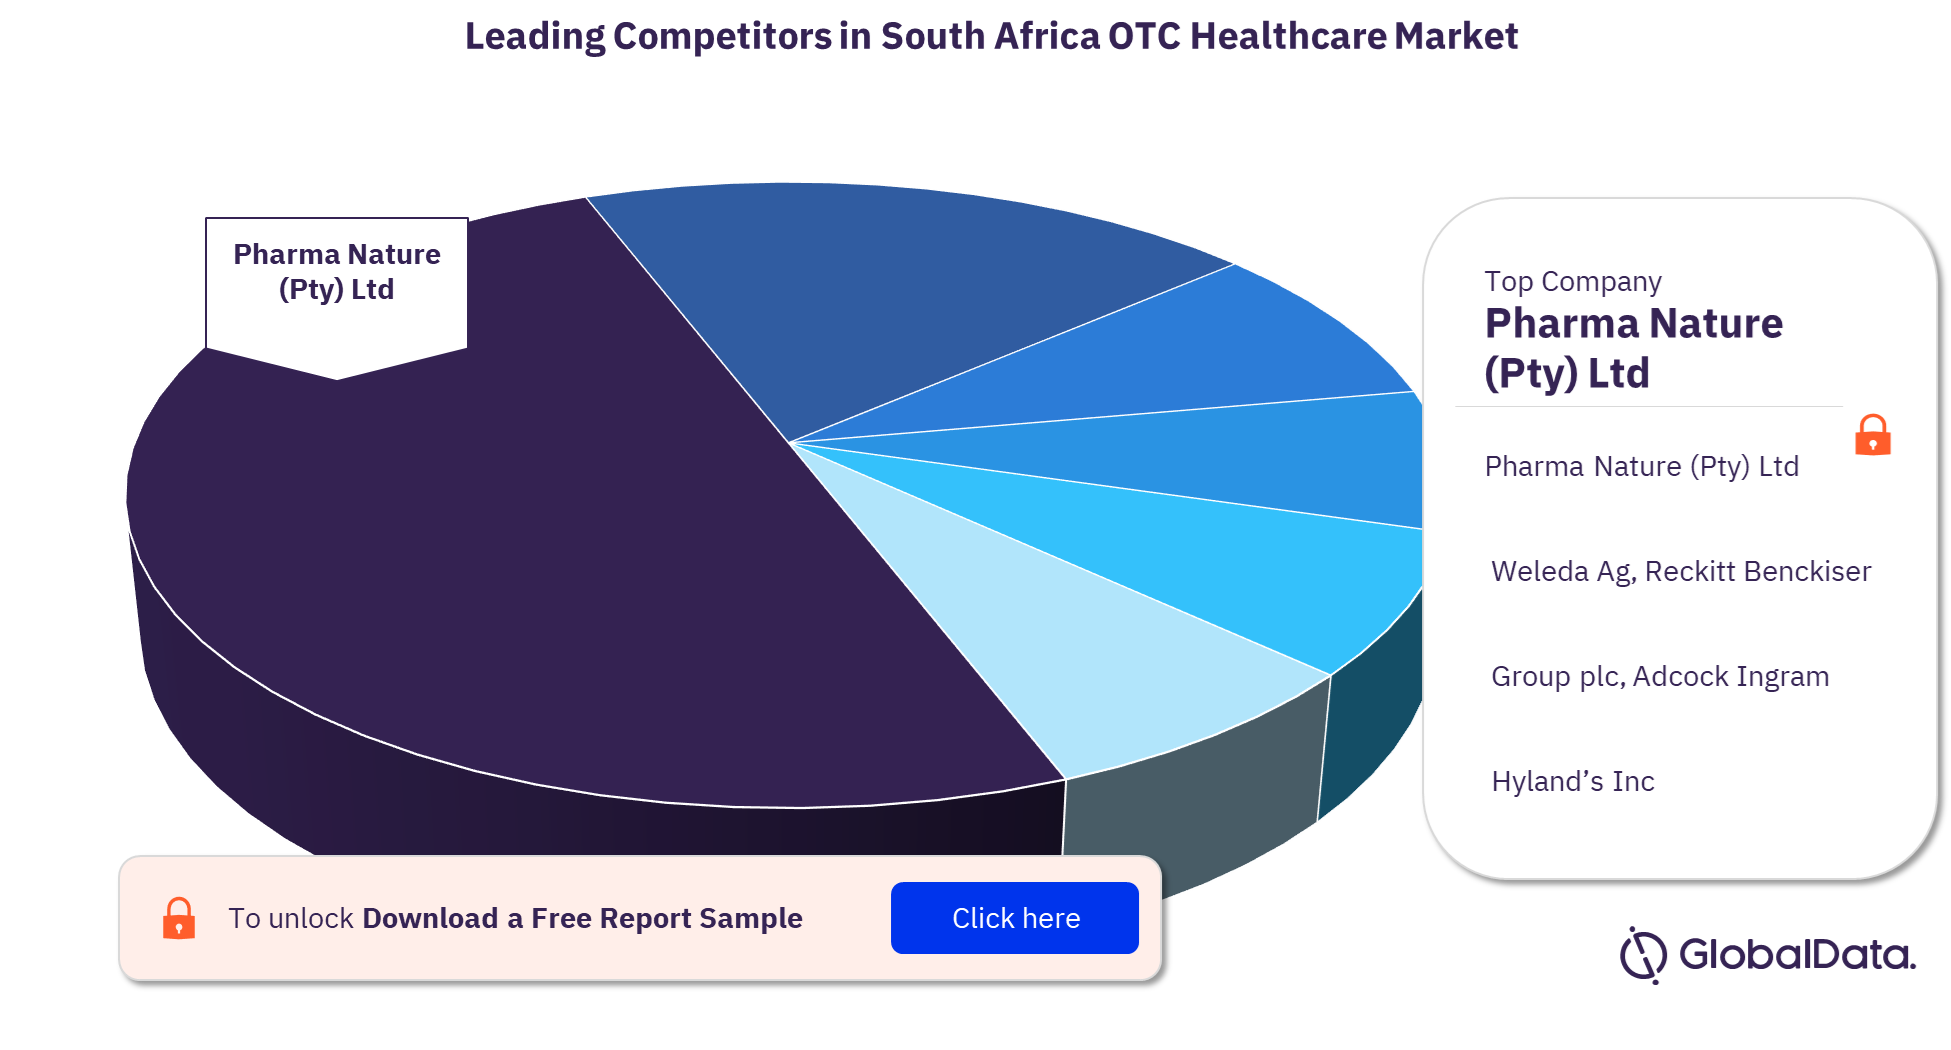 South Africa OTC healthcare market, by key competitors